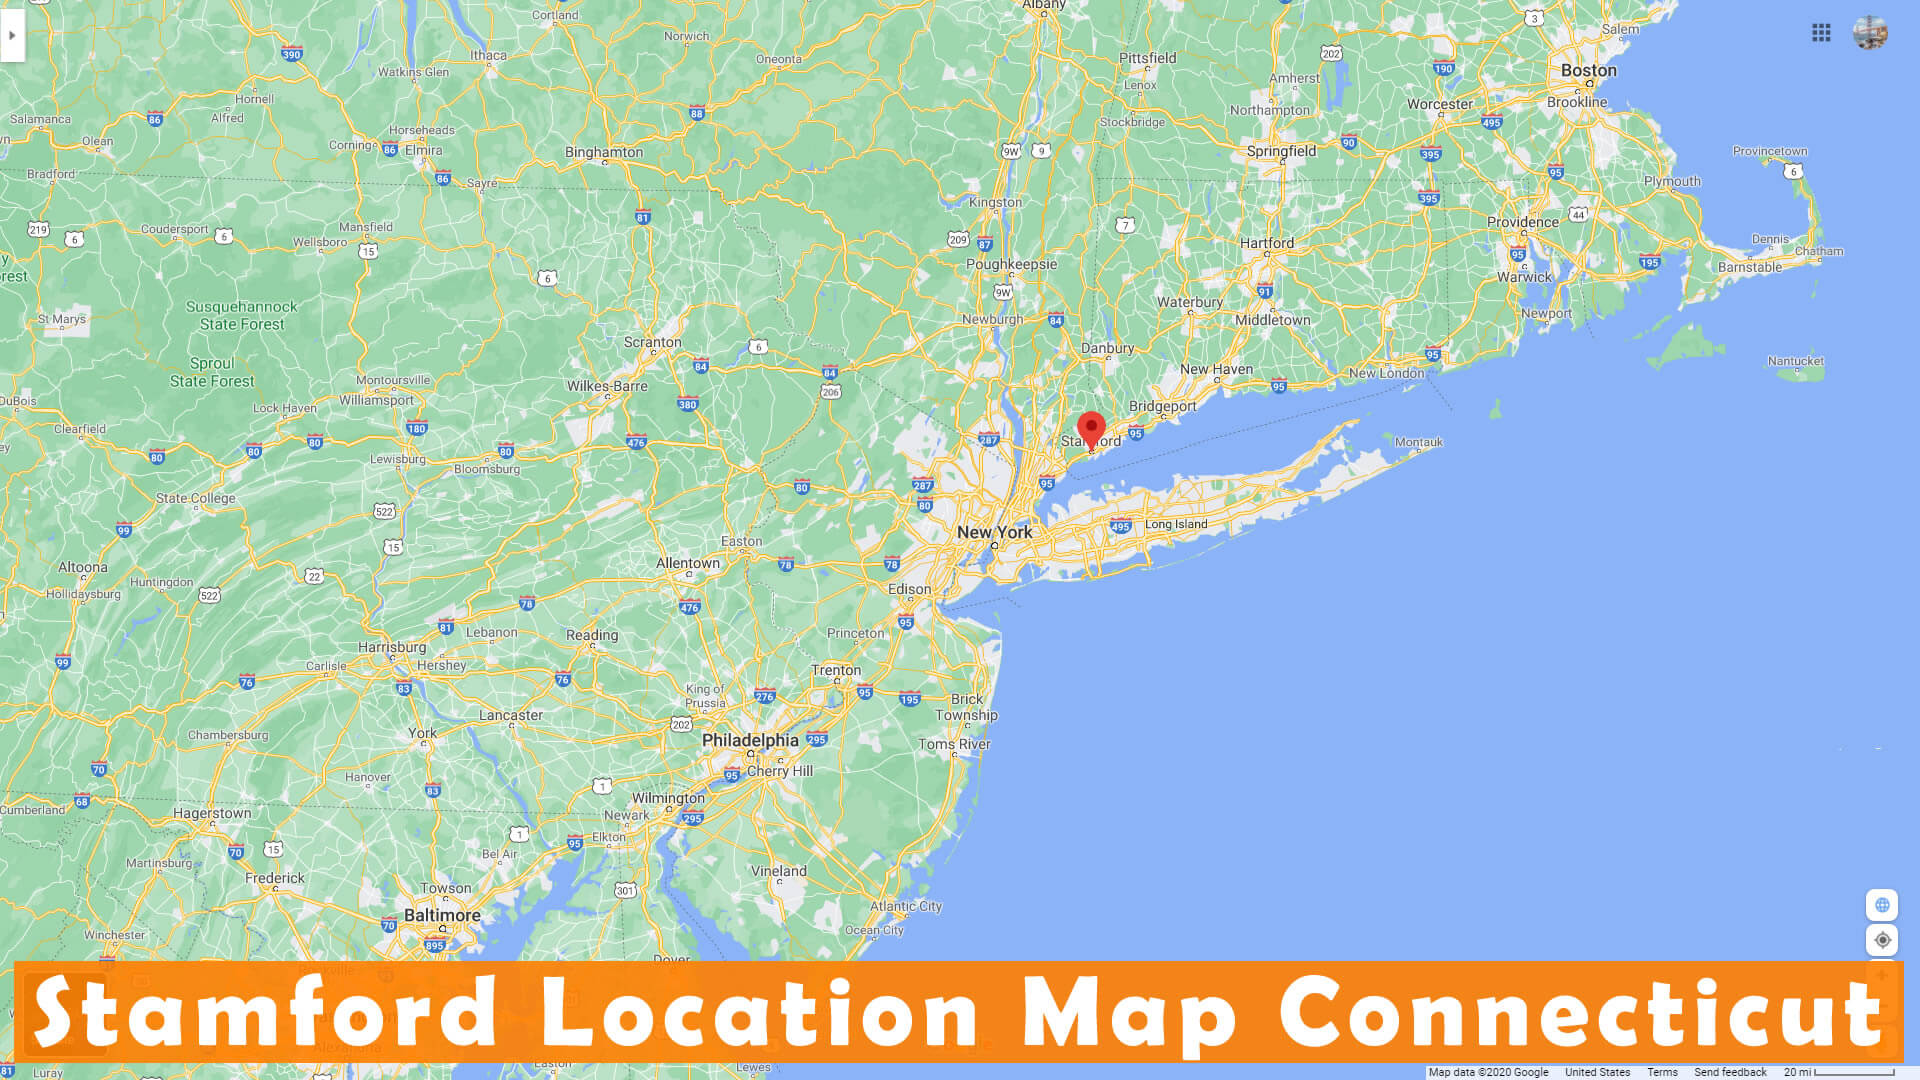 Stamford Location Map Connecticut